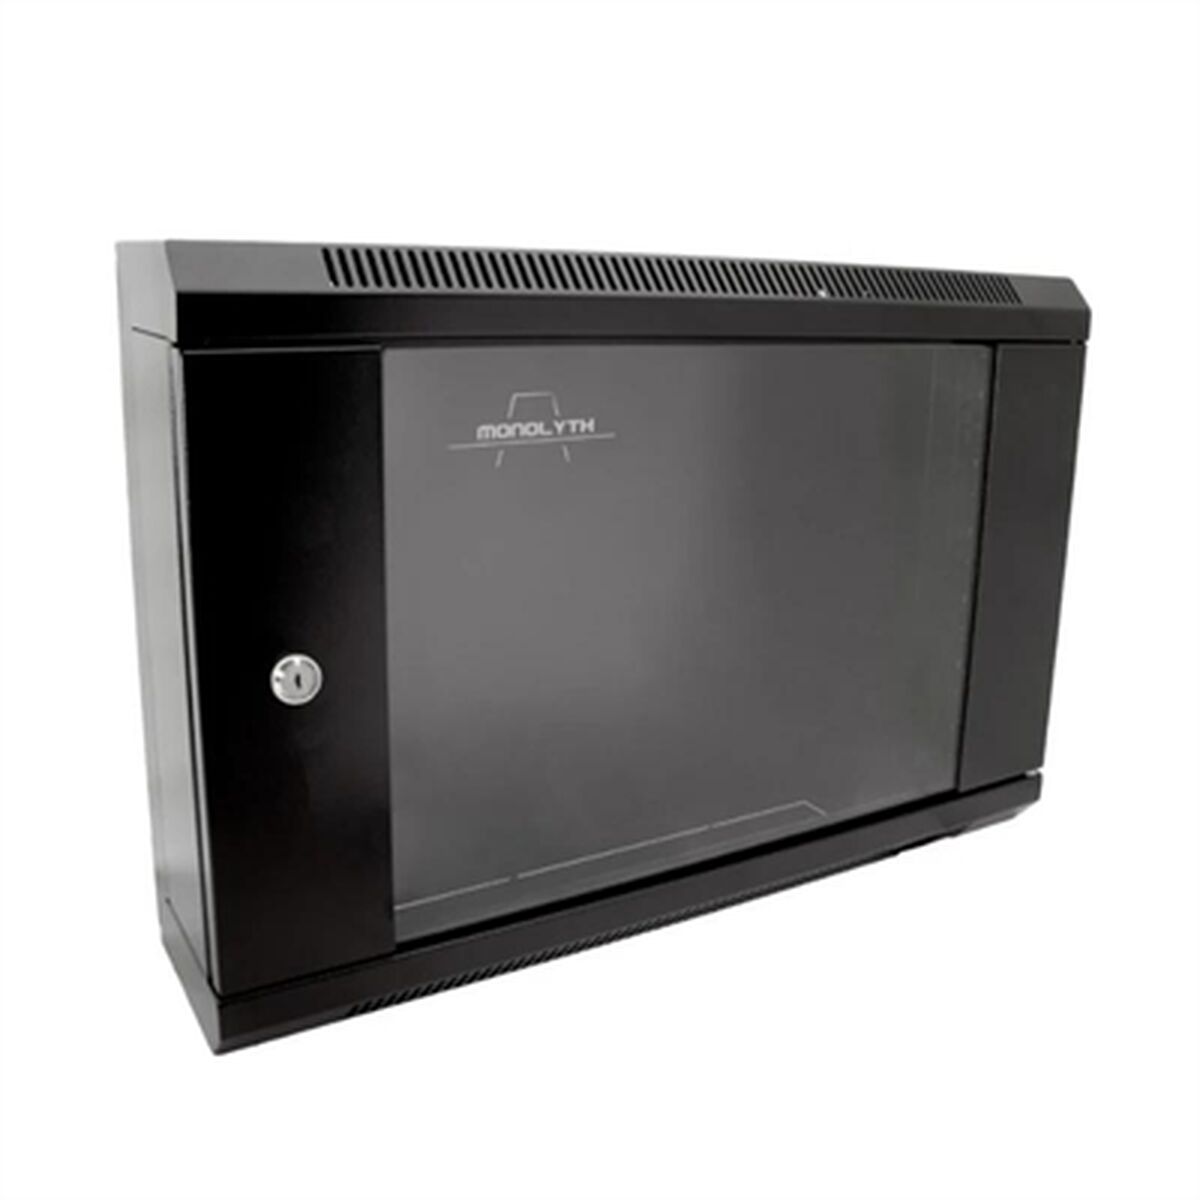 Wall-mounted Rack Cabinet Monolyth WM6109, Monolyth, Computing, Accessories, wall-mounted-rack-cabinet-monolyth-wm6109, Brand_Monolyth, category-reference-2609, category-reference-2803, category-reference-2828, category-reference-t-19685, category-reference-t-19908, category-reference-t-21349, Condition_NEW, furniture, networks/wiring, organisation, Price_50 - 100, Teleworking, RiotNook